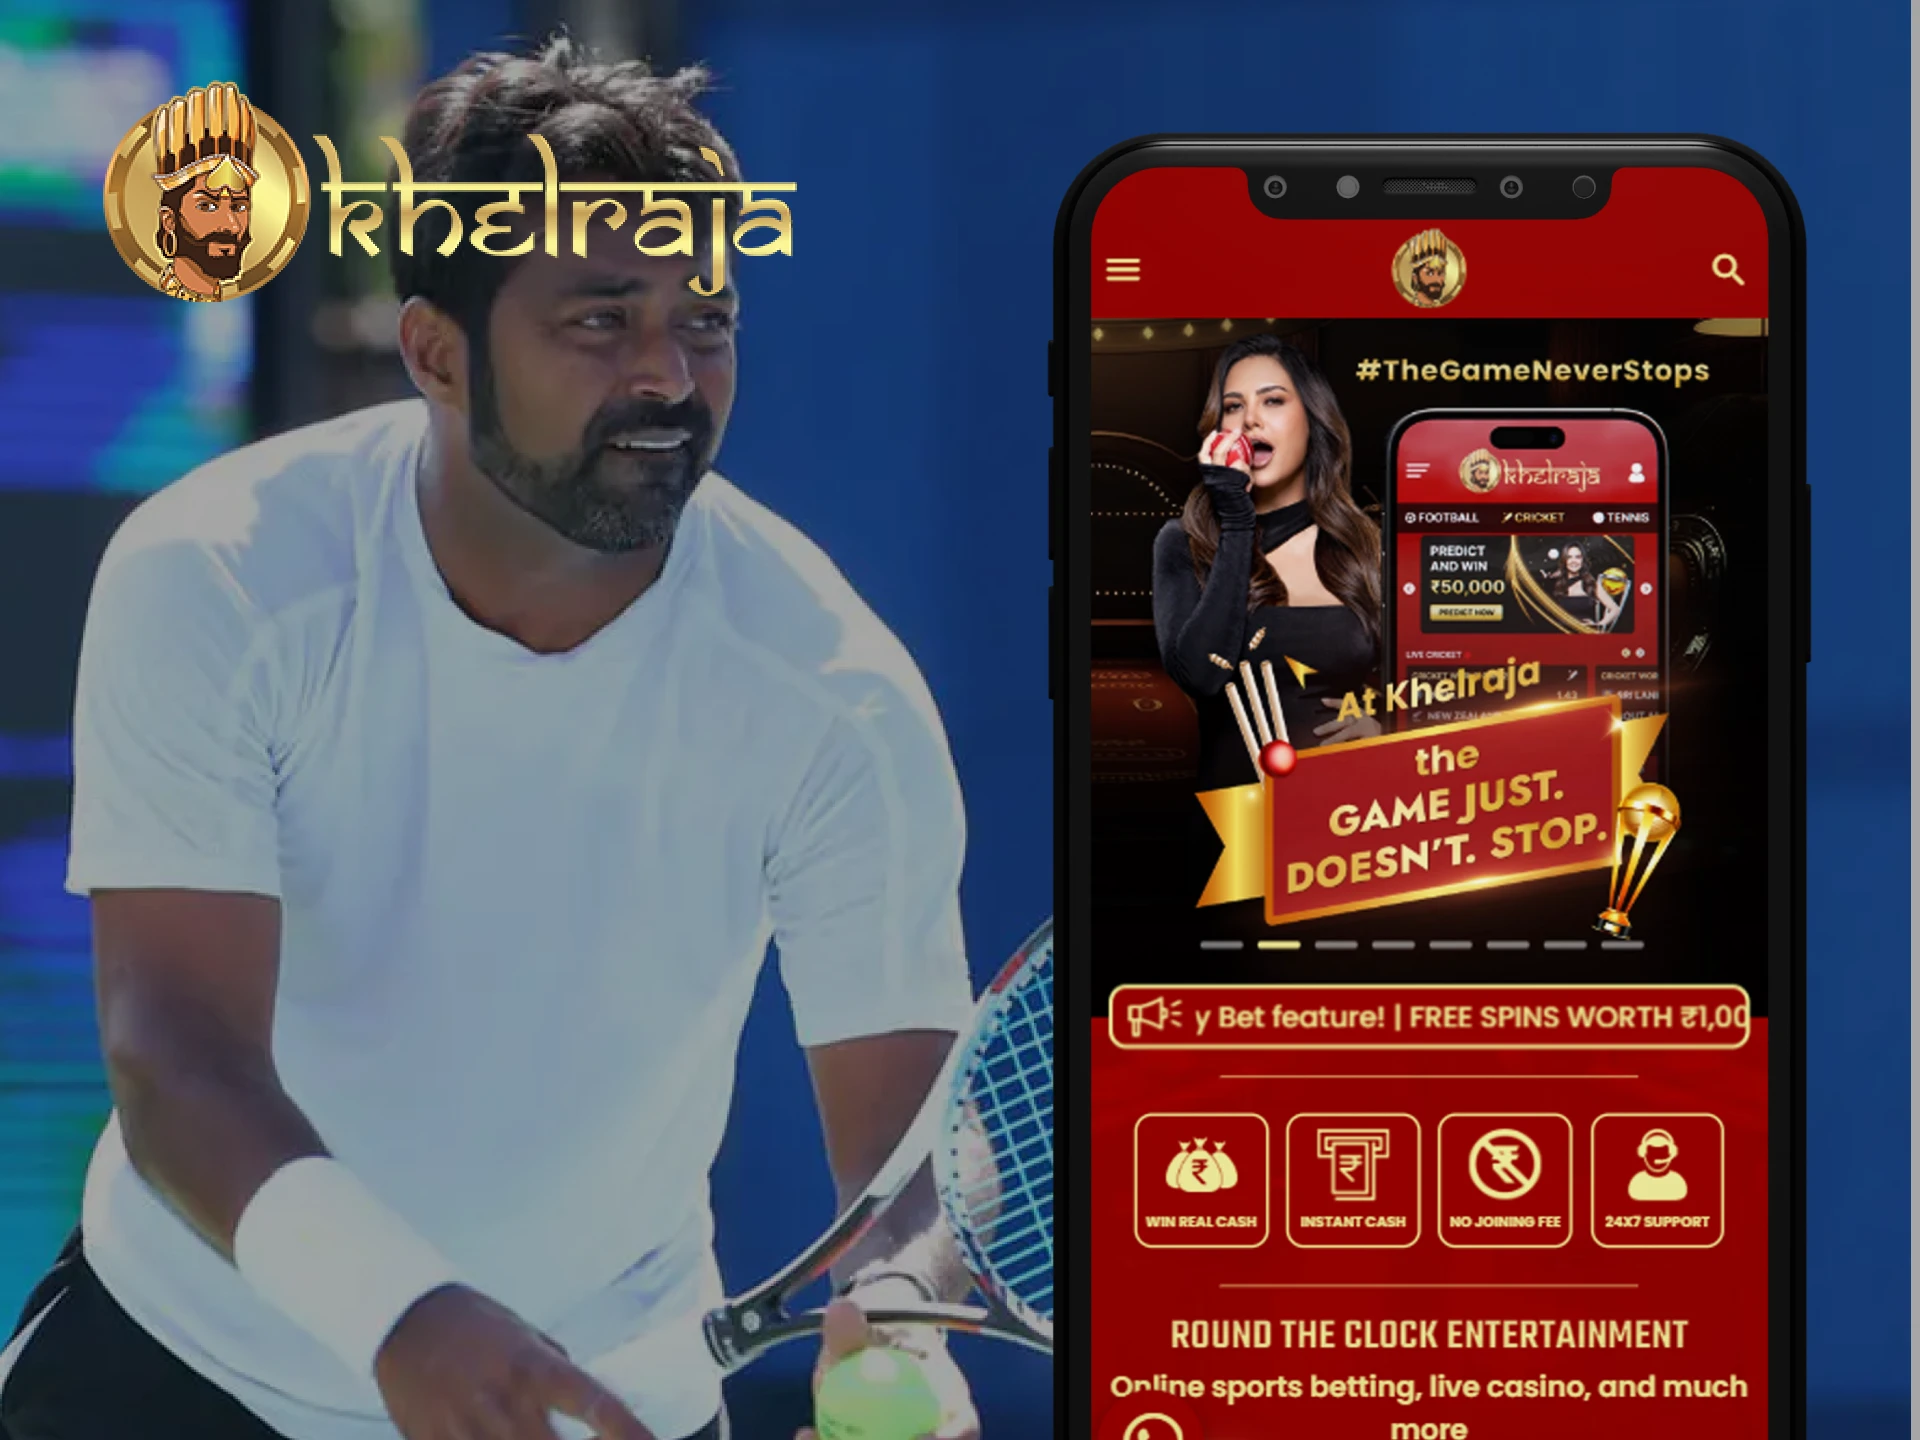 The Khelraja app provides access to a wide range of betting options across a variety of sports.